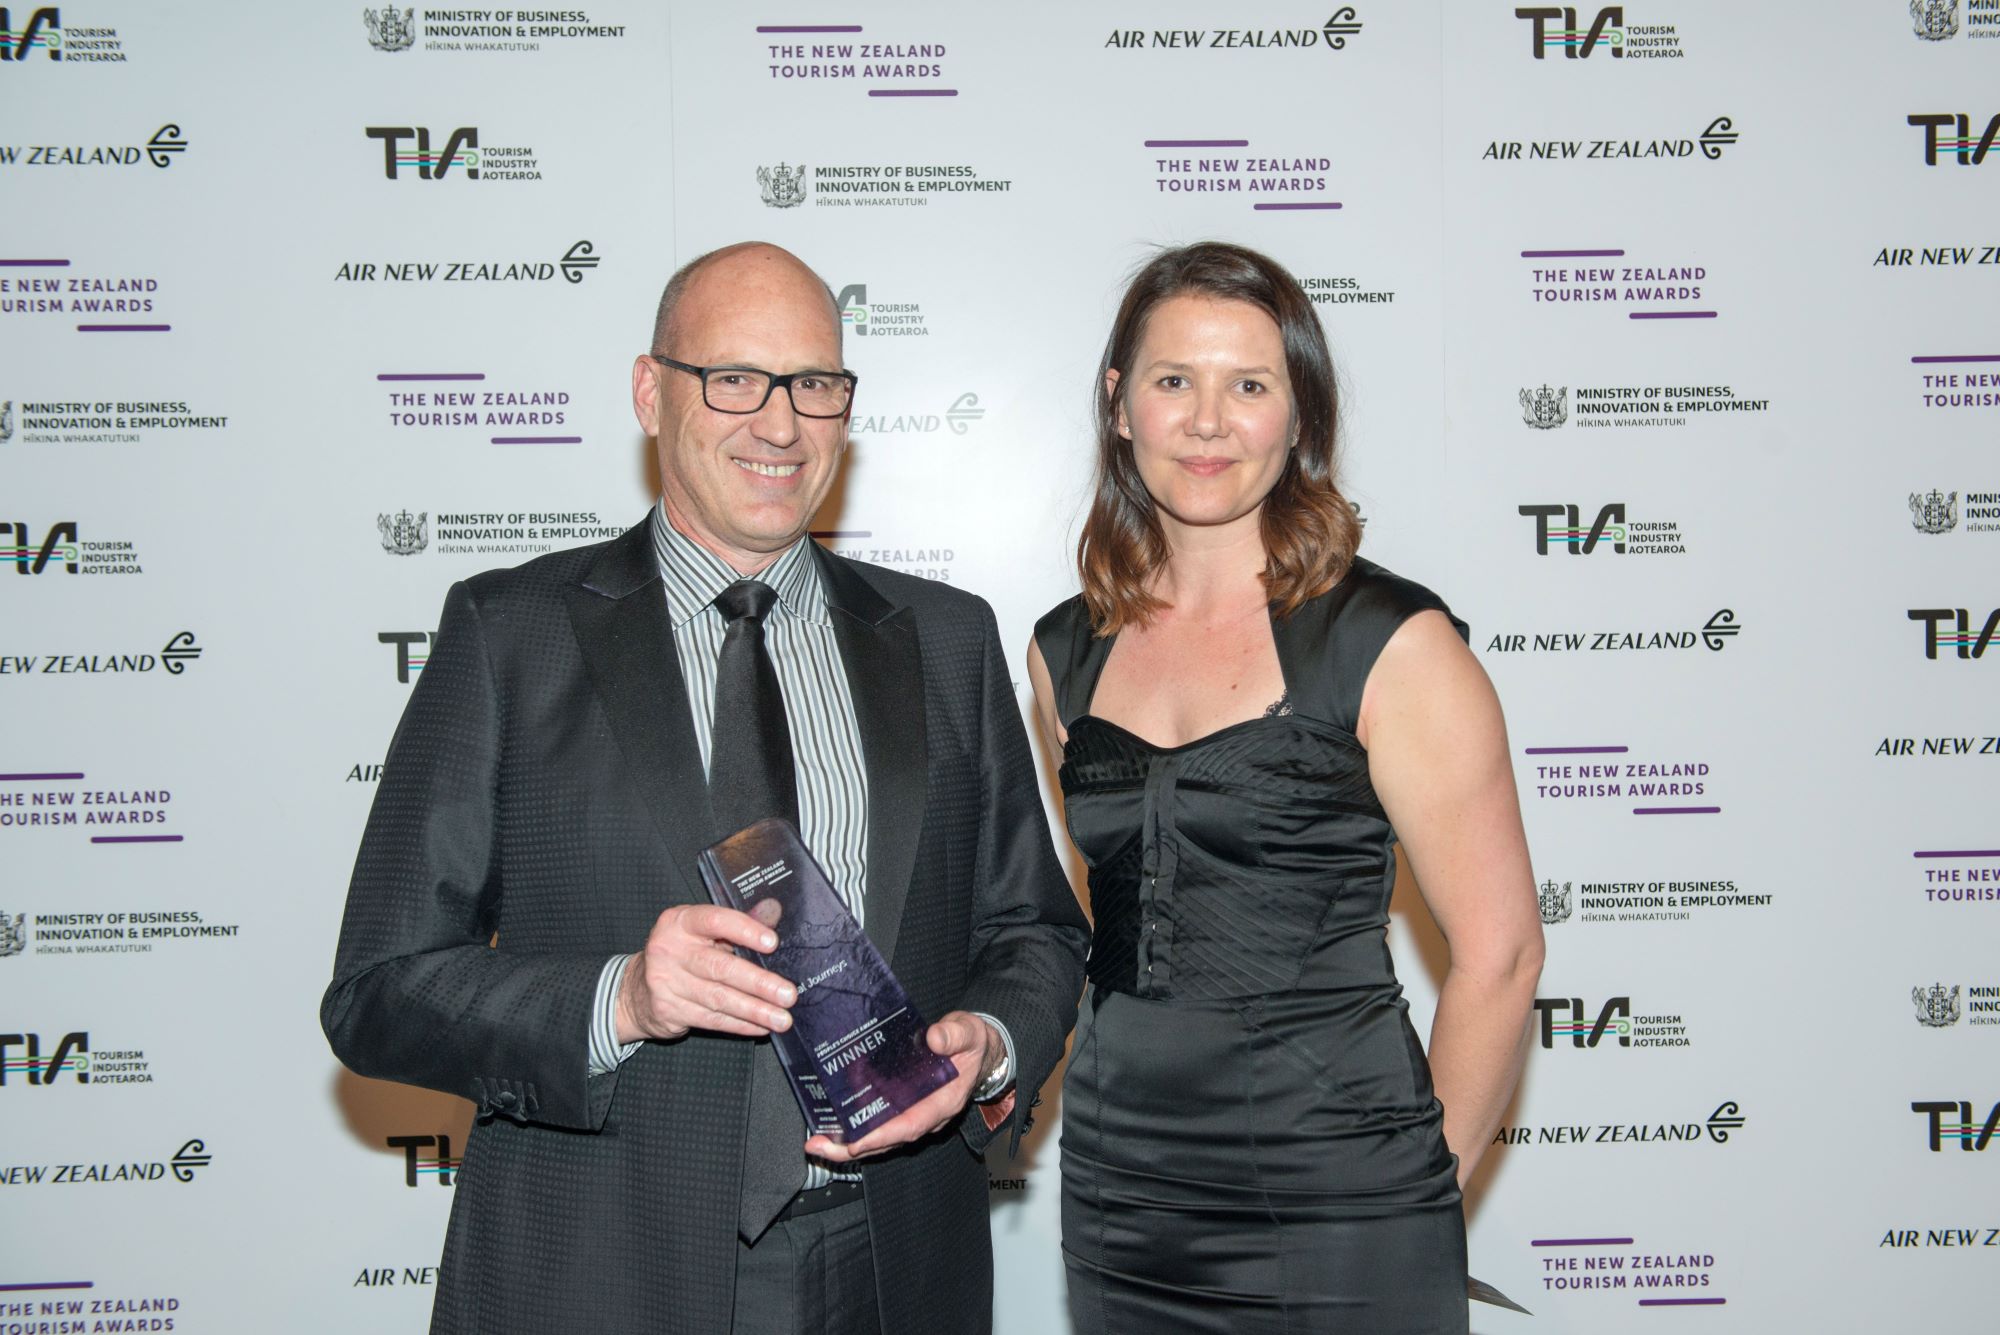 Richard lauder at the Tourism Industry Awards